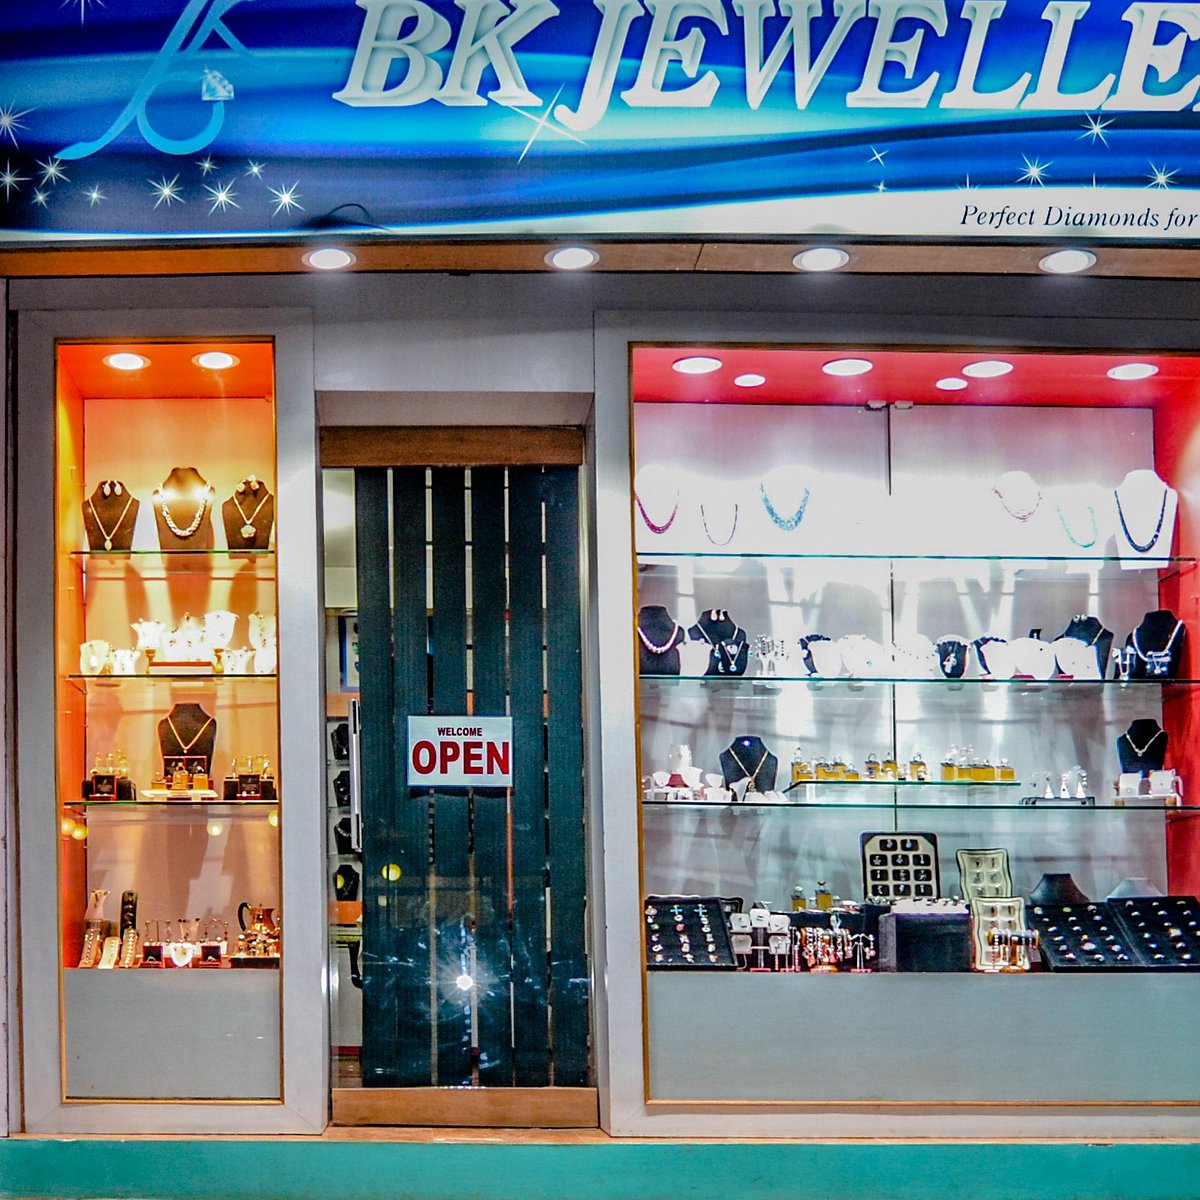 BK Jewellers (Candolim) - All You Need to Know BEFORE You Go